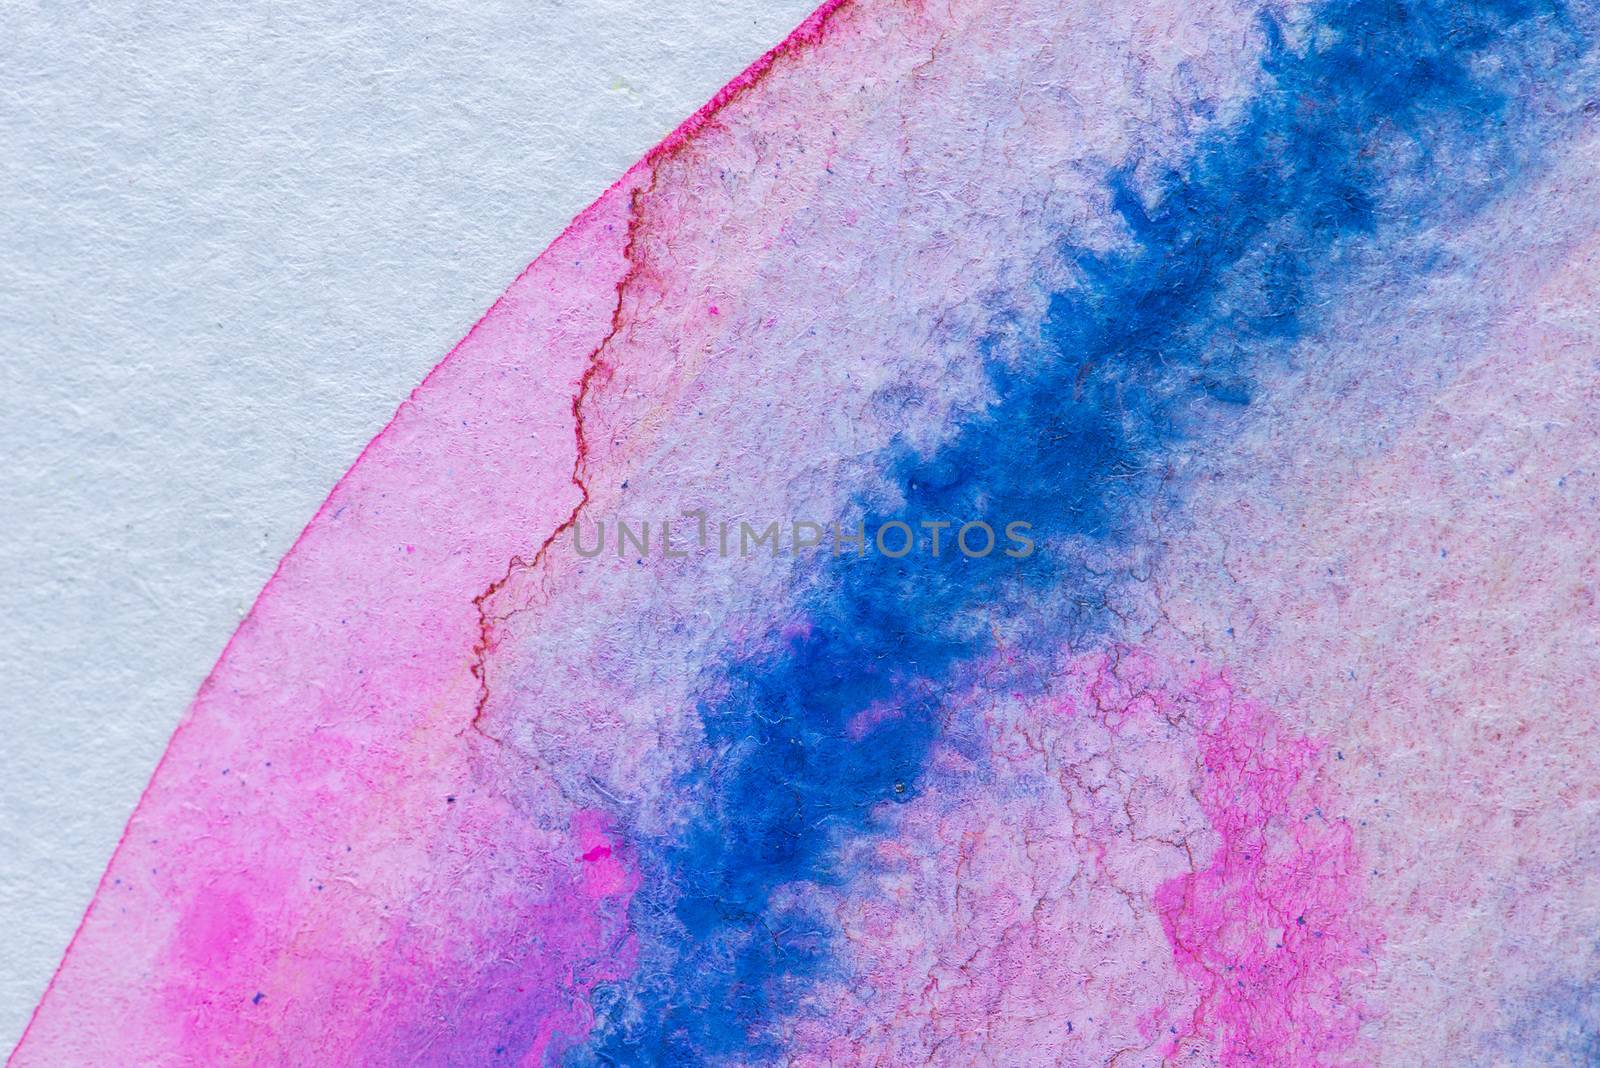 Abstract aquarelle hand drawn art on white background, Watercolor grunge texture backdrop